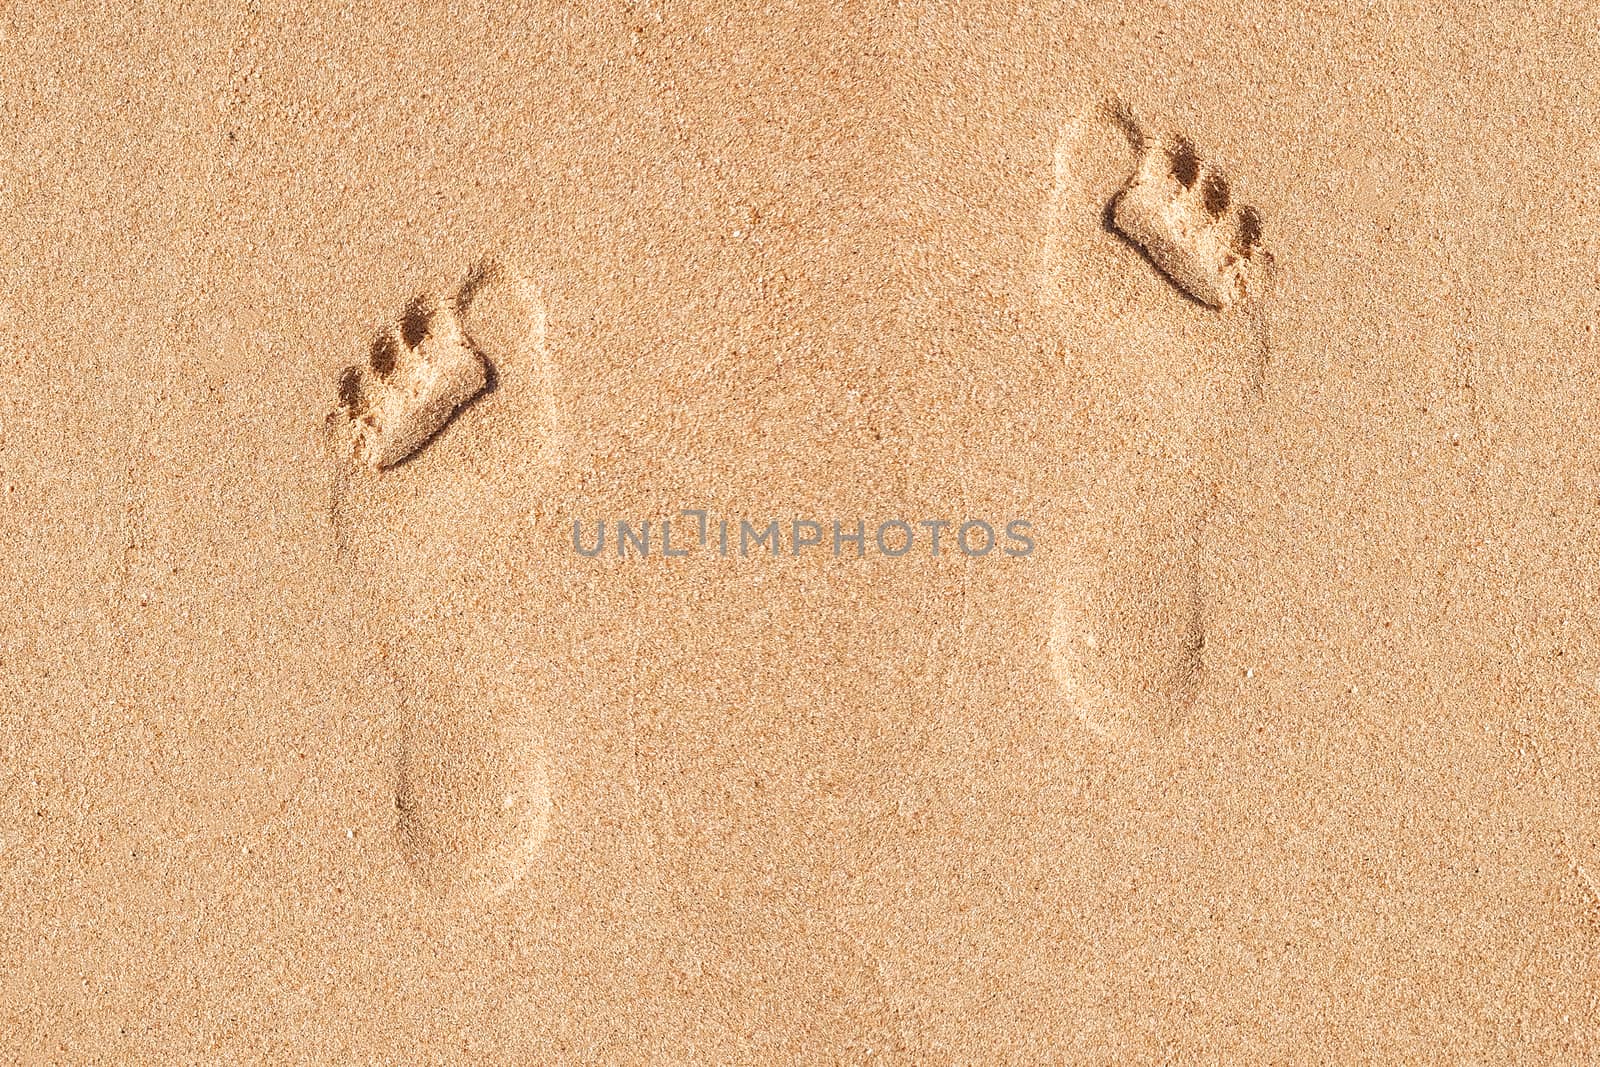 Foot print in the Sand by Surasak